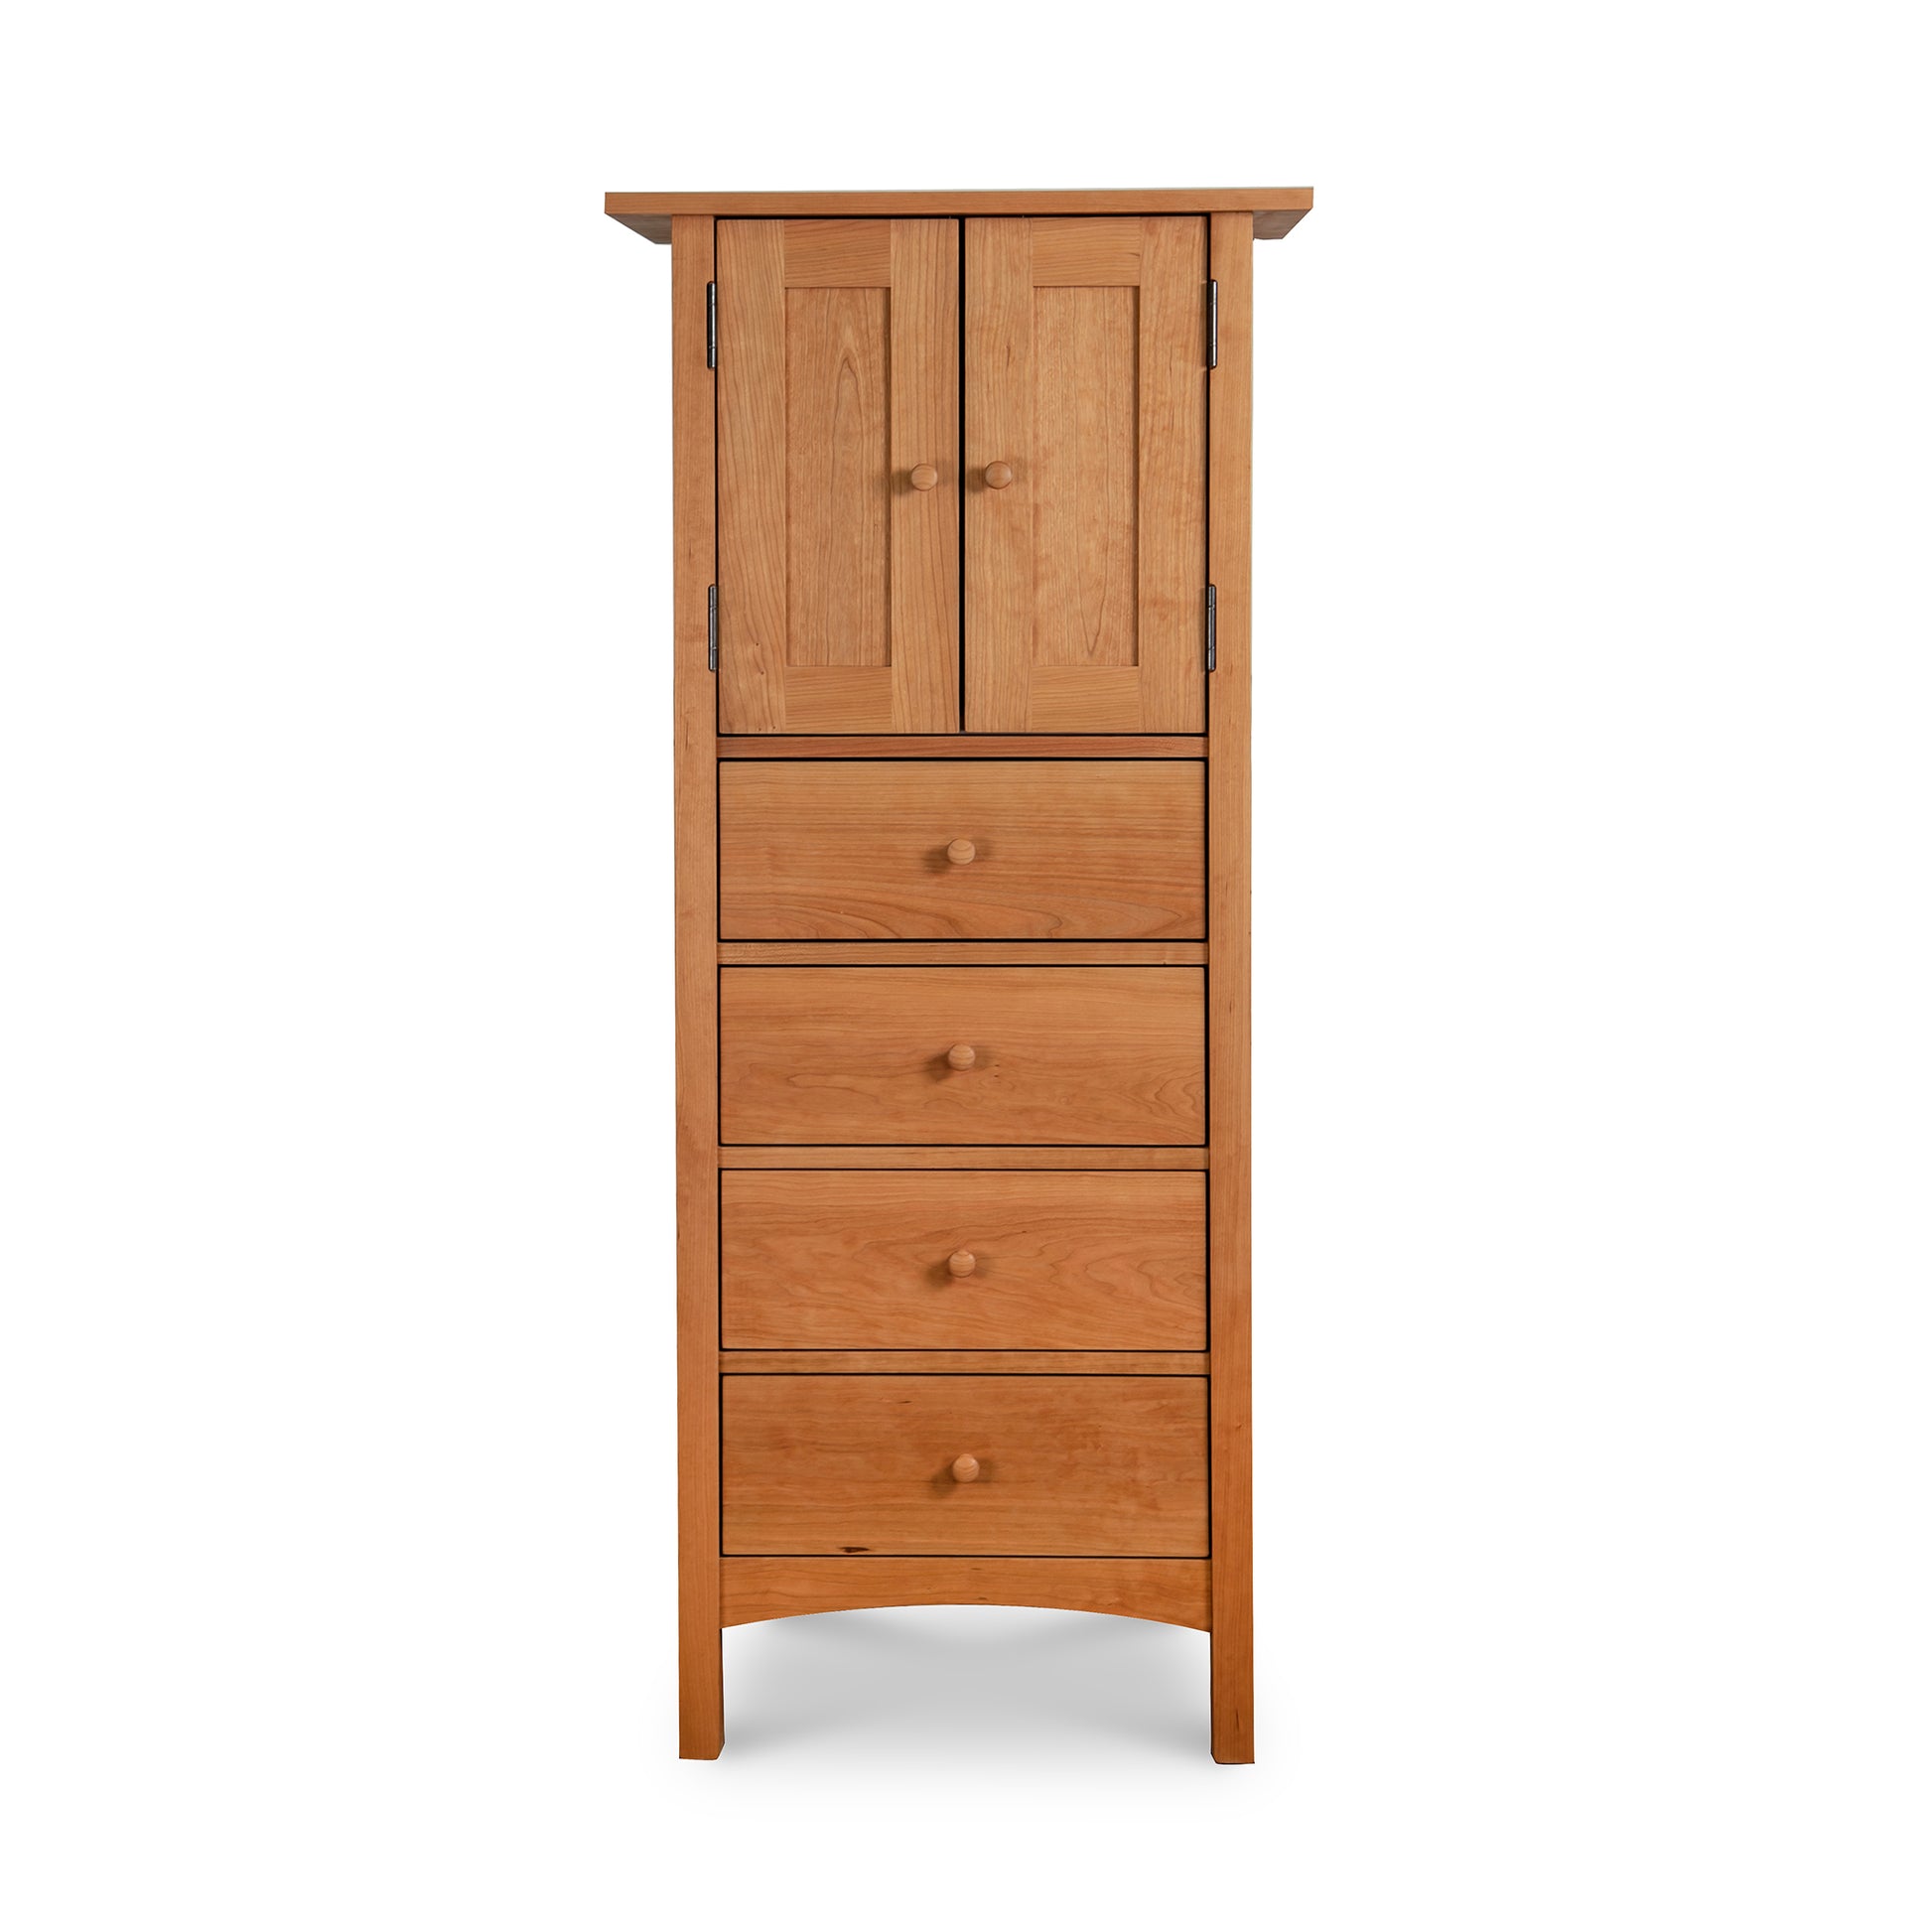 A solid wood Vermont Furniture Designs Burlington Shaker Tall Storage Chest with five drawers and a cupboard, isolated on a white background.